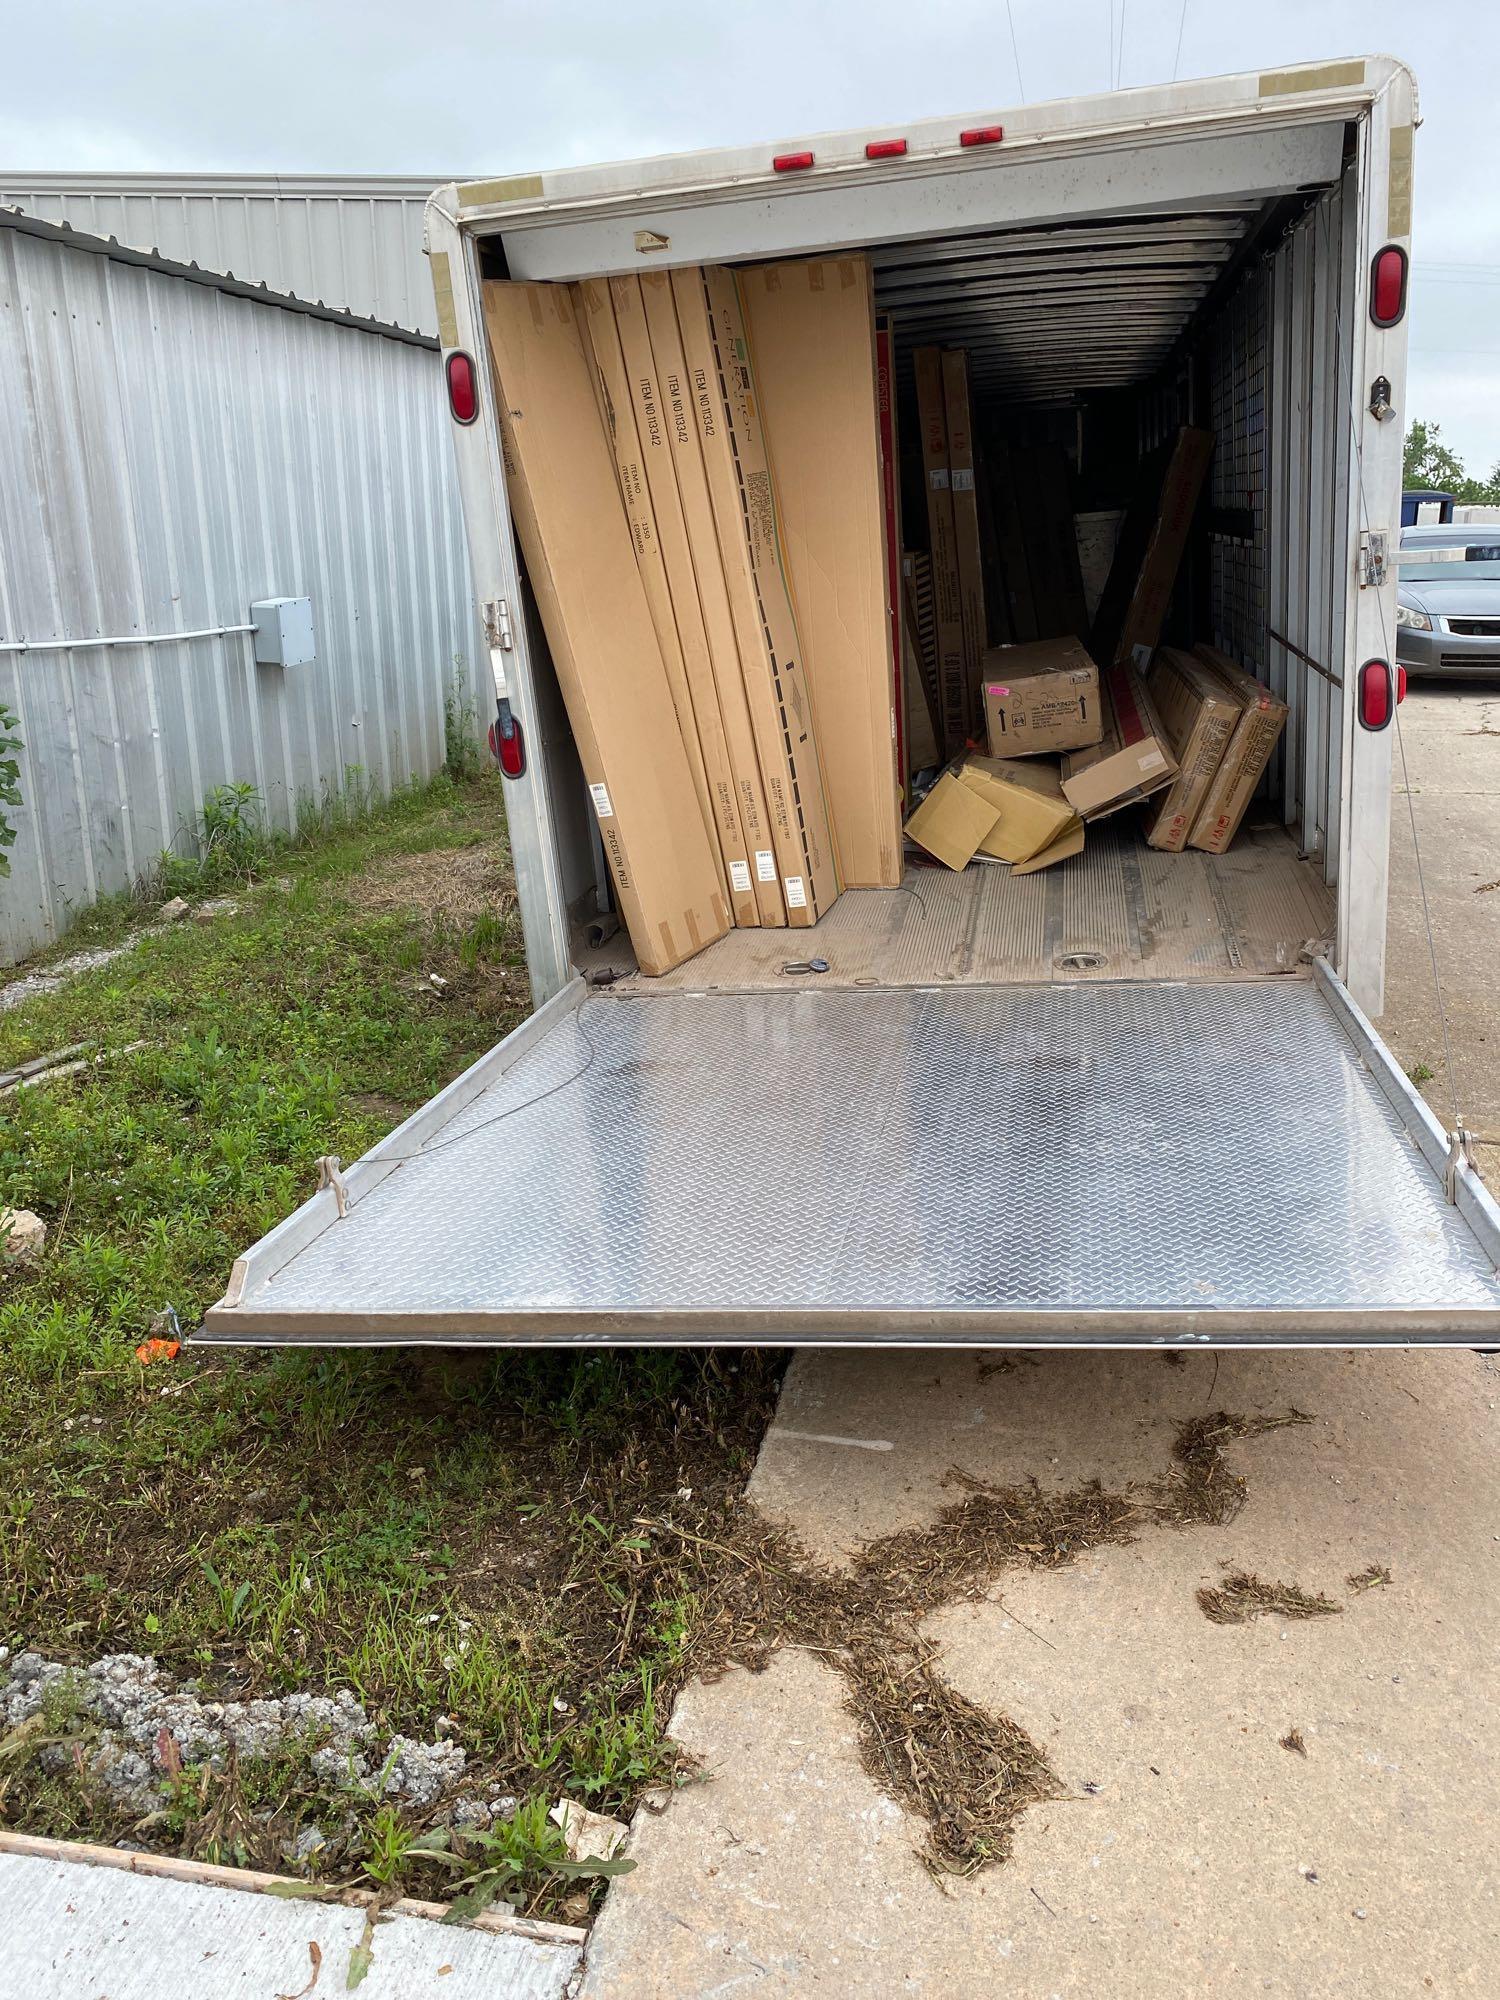 Gooseneck trailer Exis Aluminum with Awning Torsion Axles... approximately 40 ft on the floor. Total